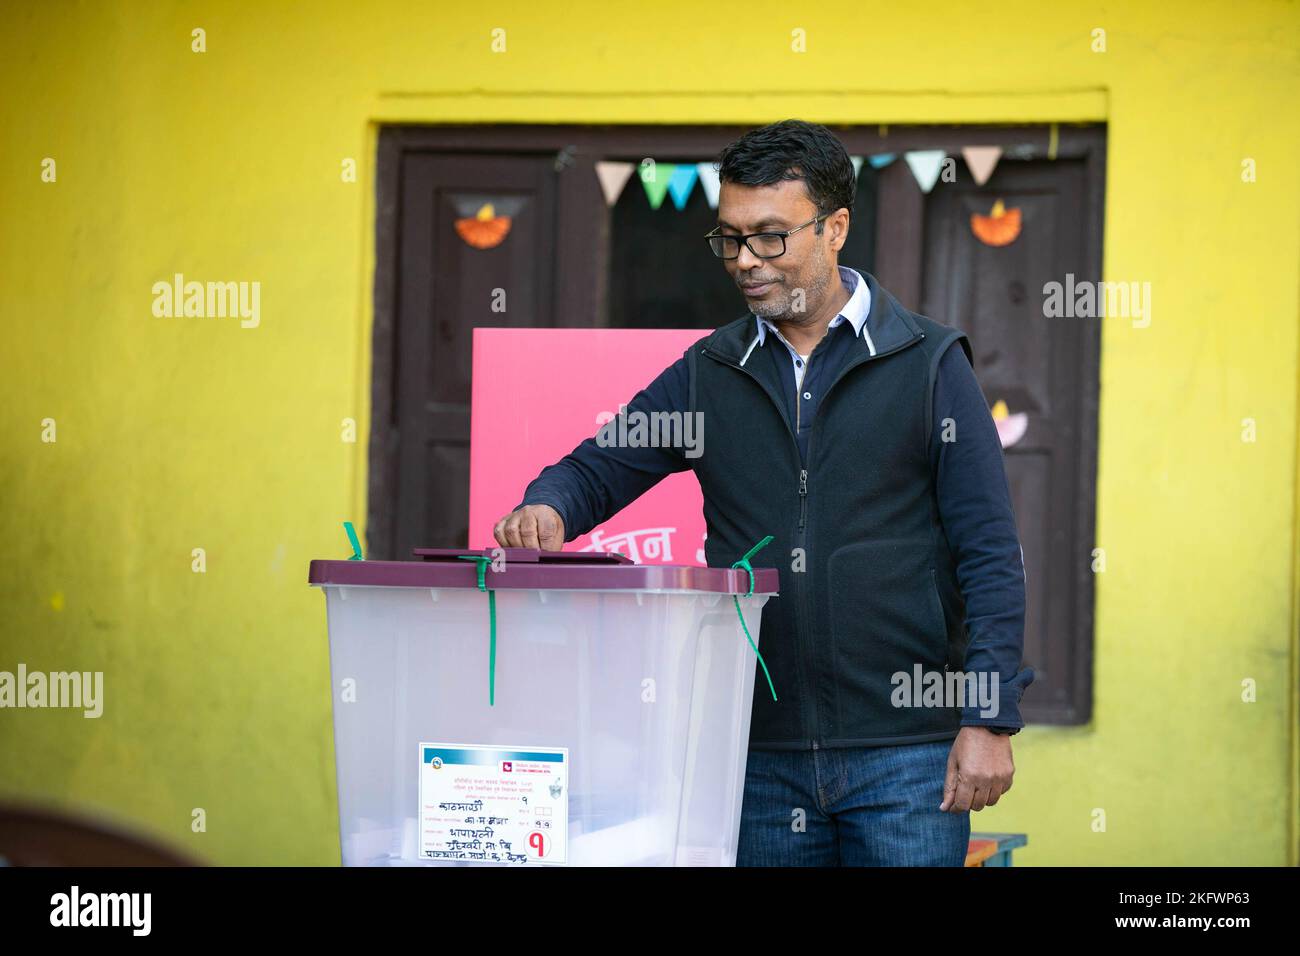 Businessman Pashupati Murarka casts his vote at a polling station in Kathmandu. A total of 17,988,570 voters are eligible to vote in the election, for which 22,227 polling booths in 10,892 polling centers have been established for the Nepal Parliamentary election. Stock Photo